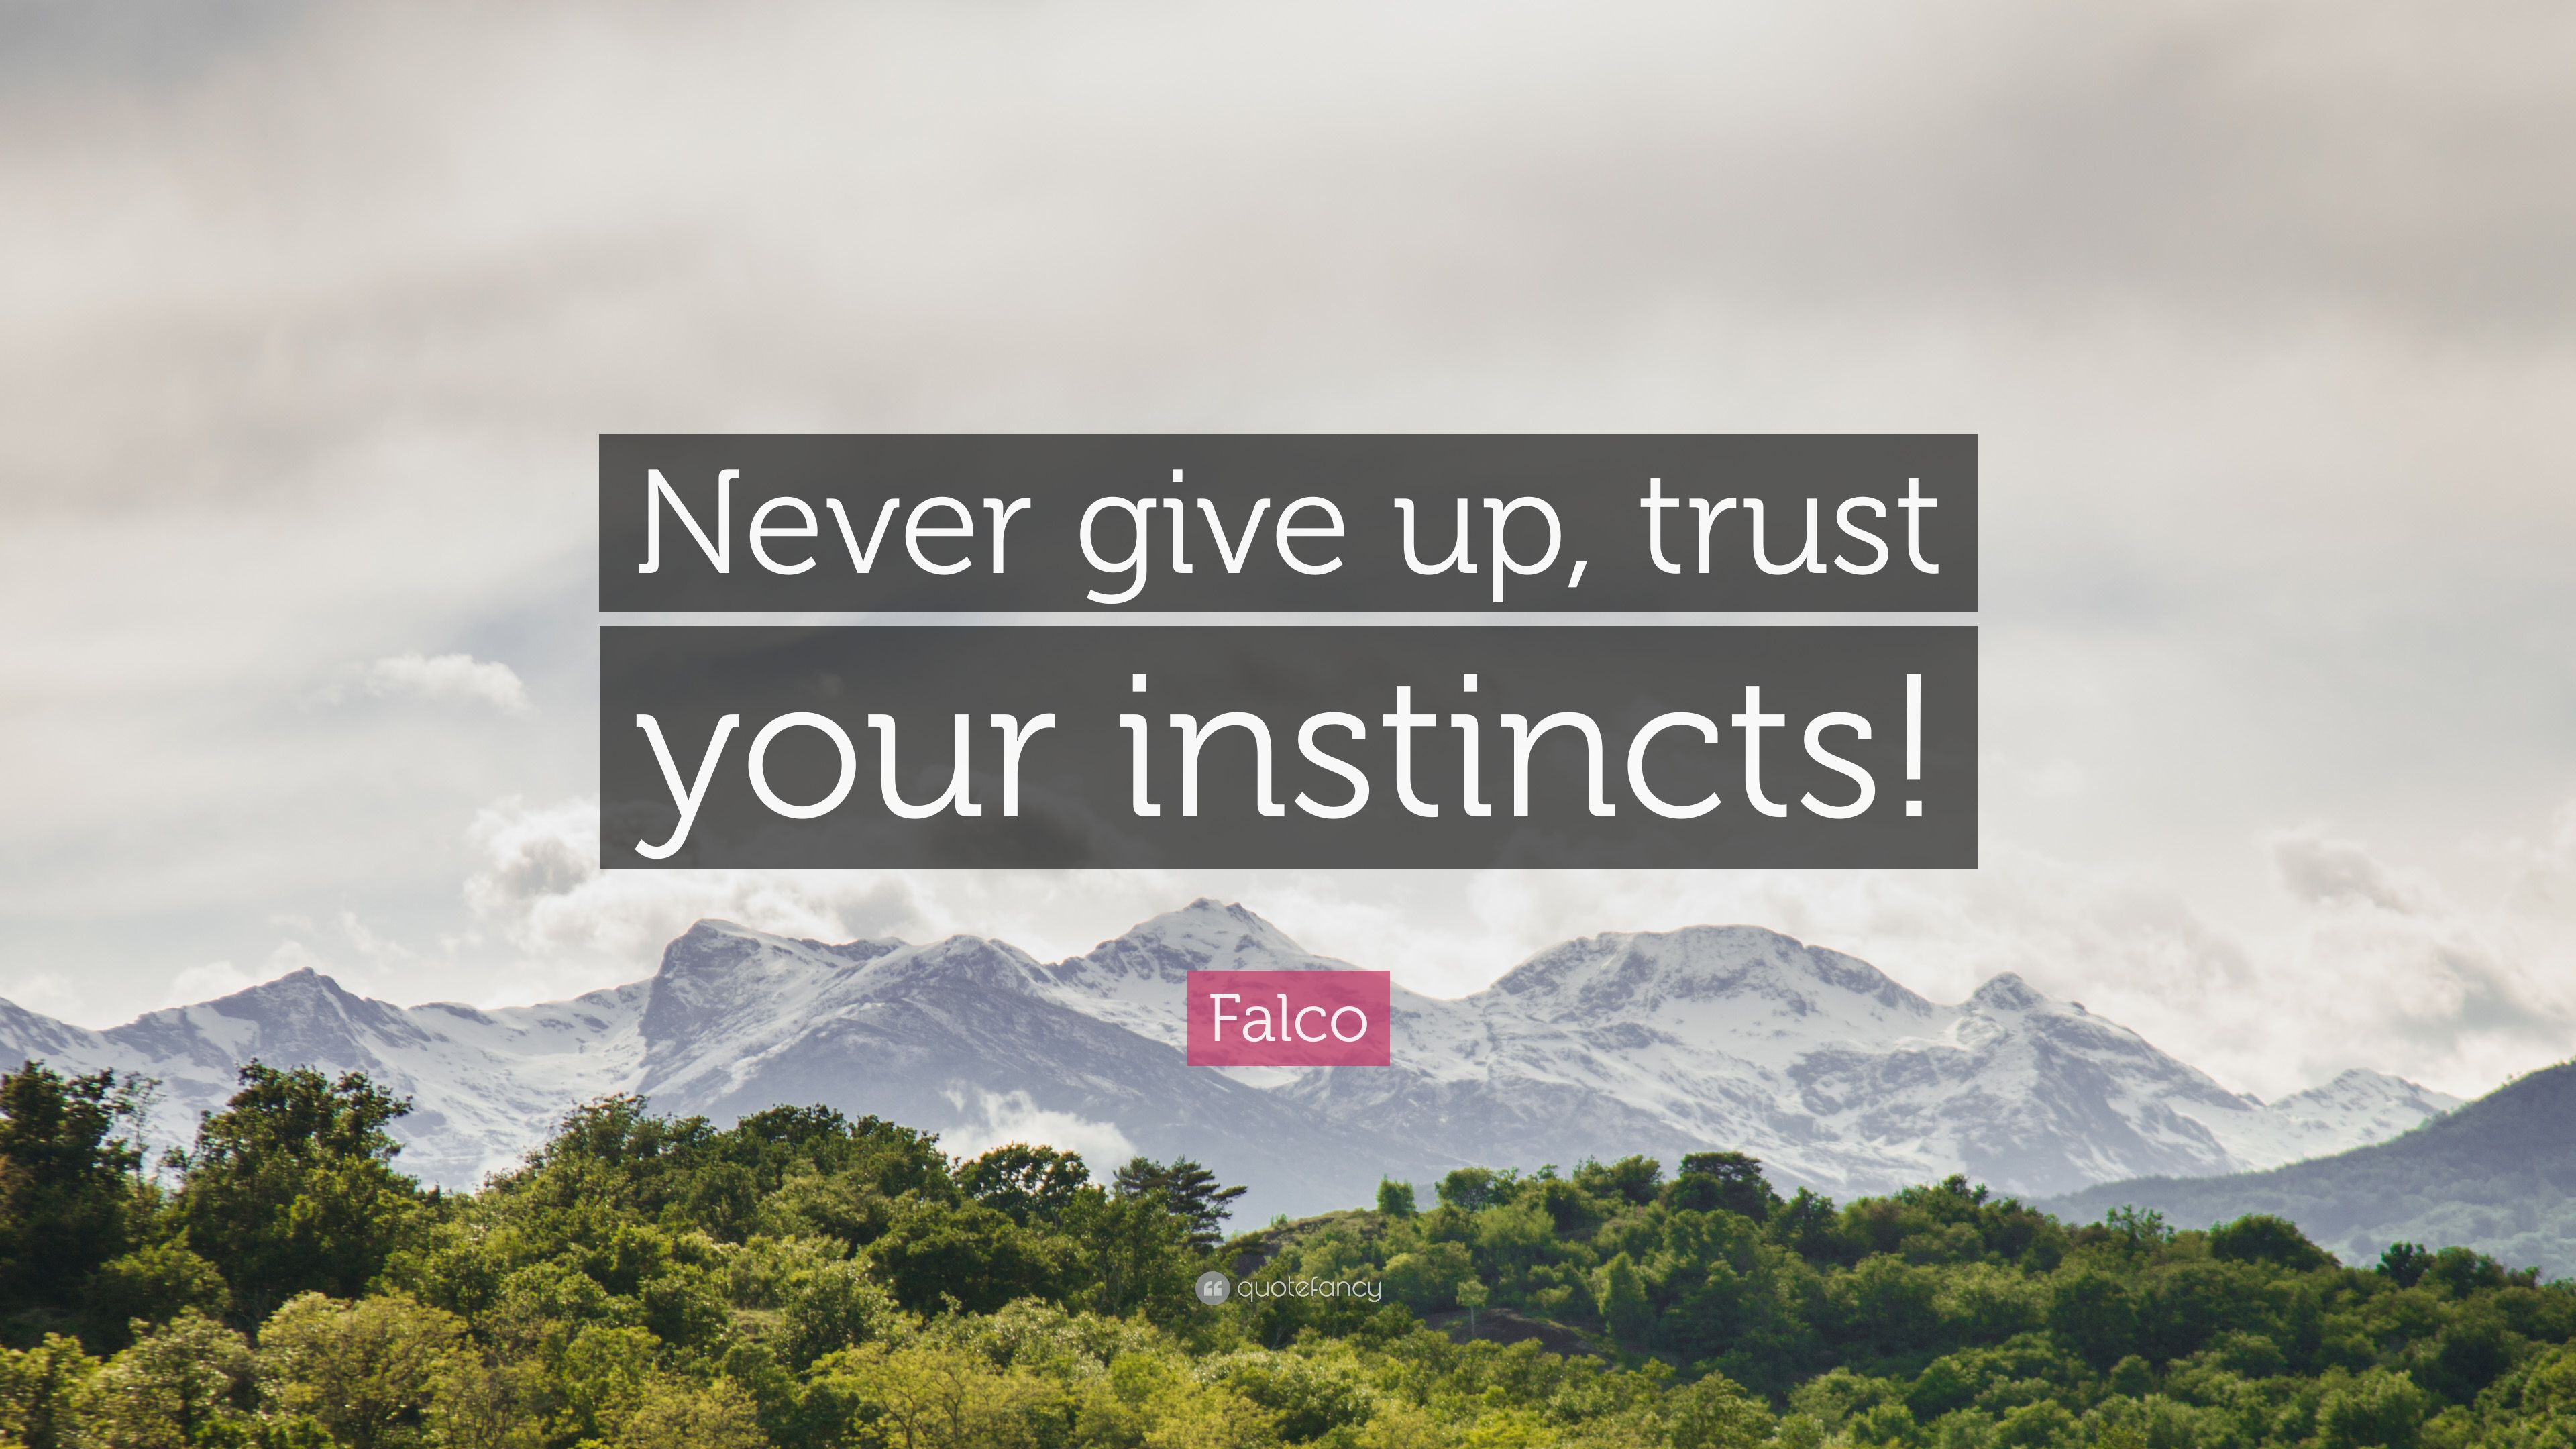 Falco Quote: “Never give up, trust your instincts!” 7 wallpaper